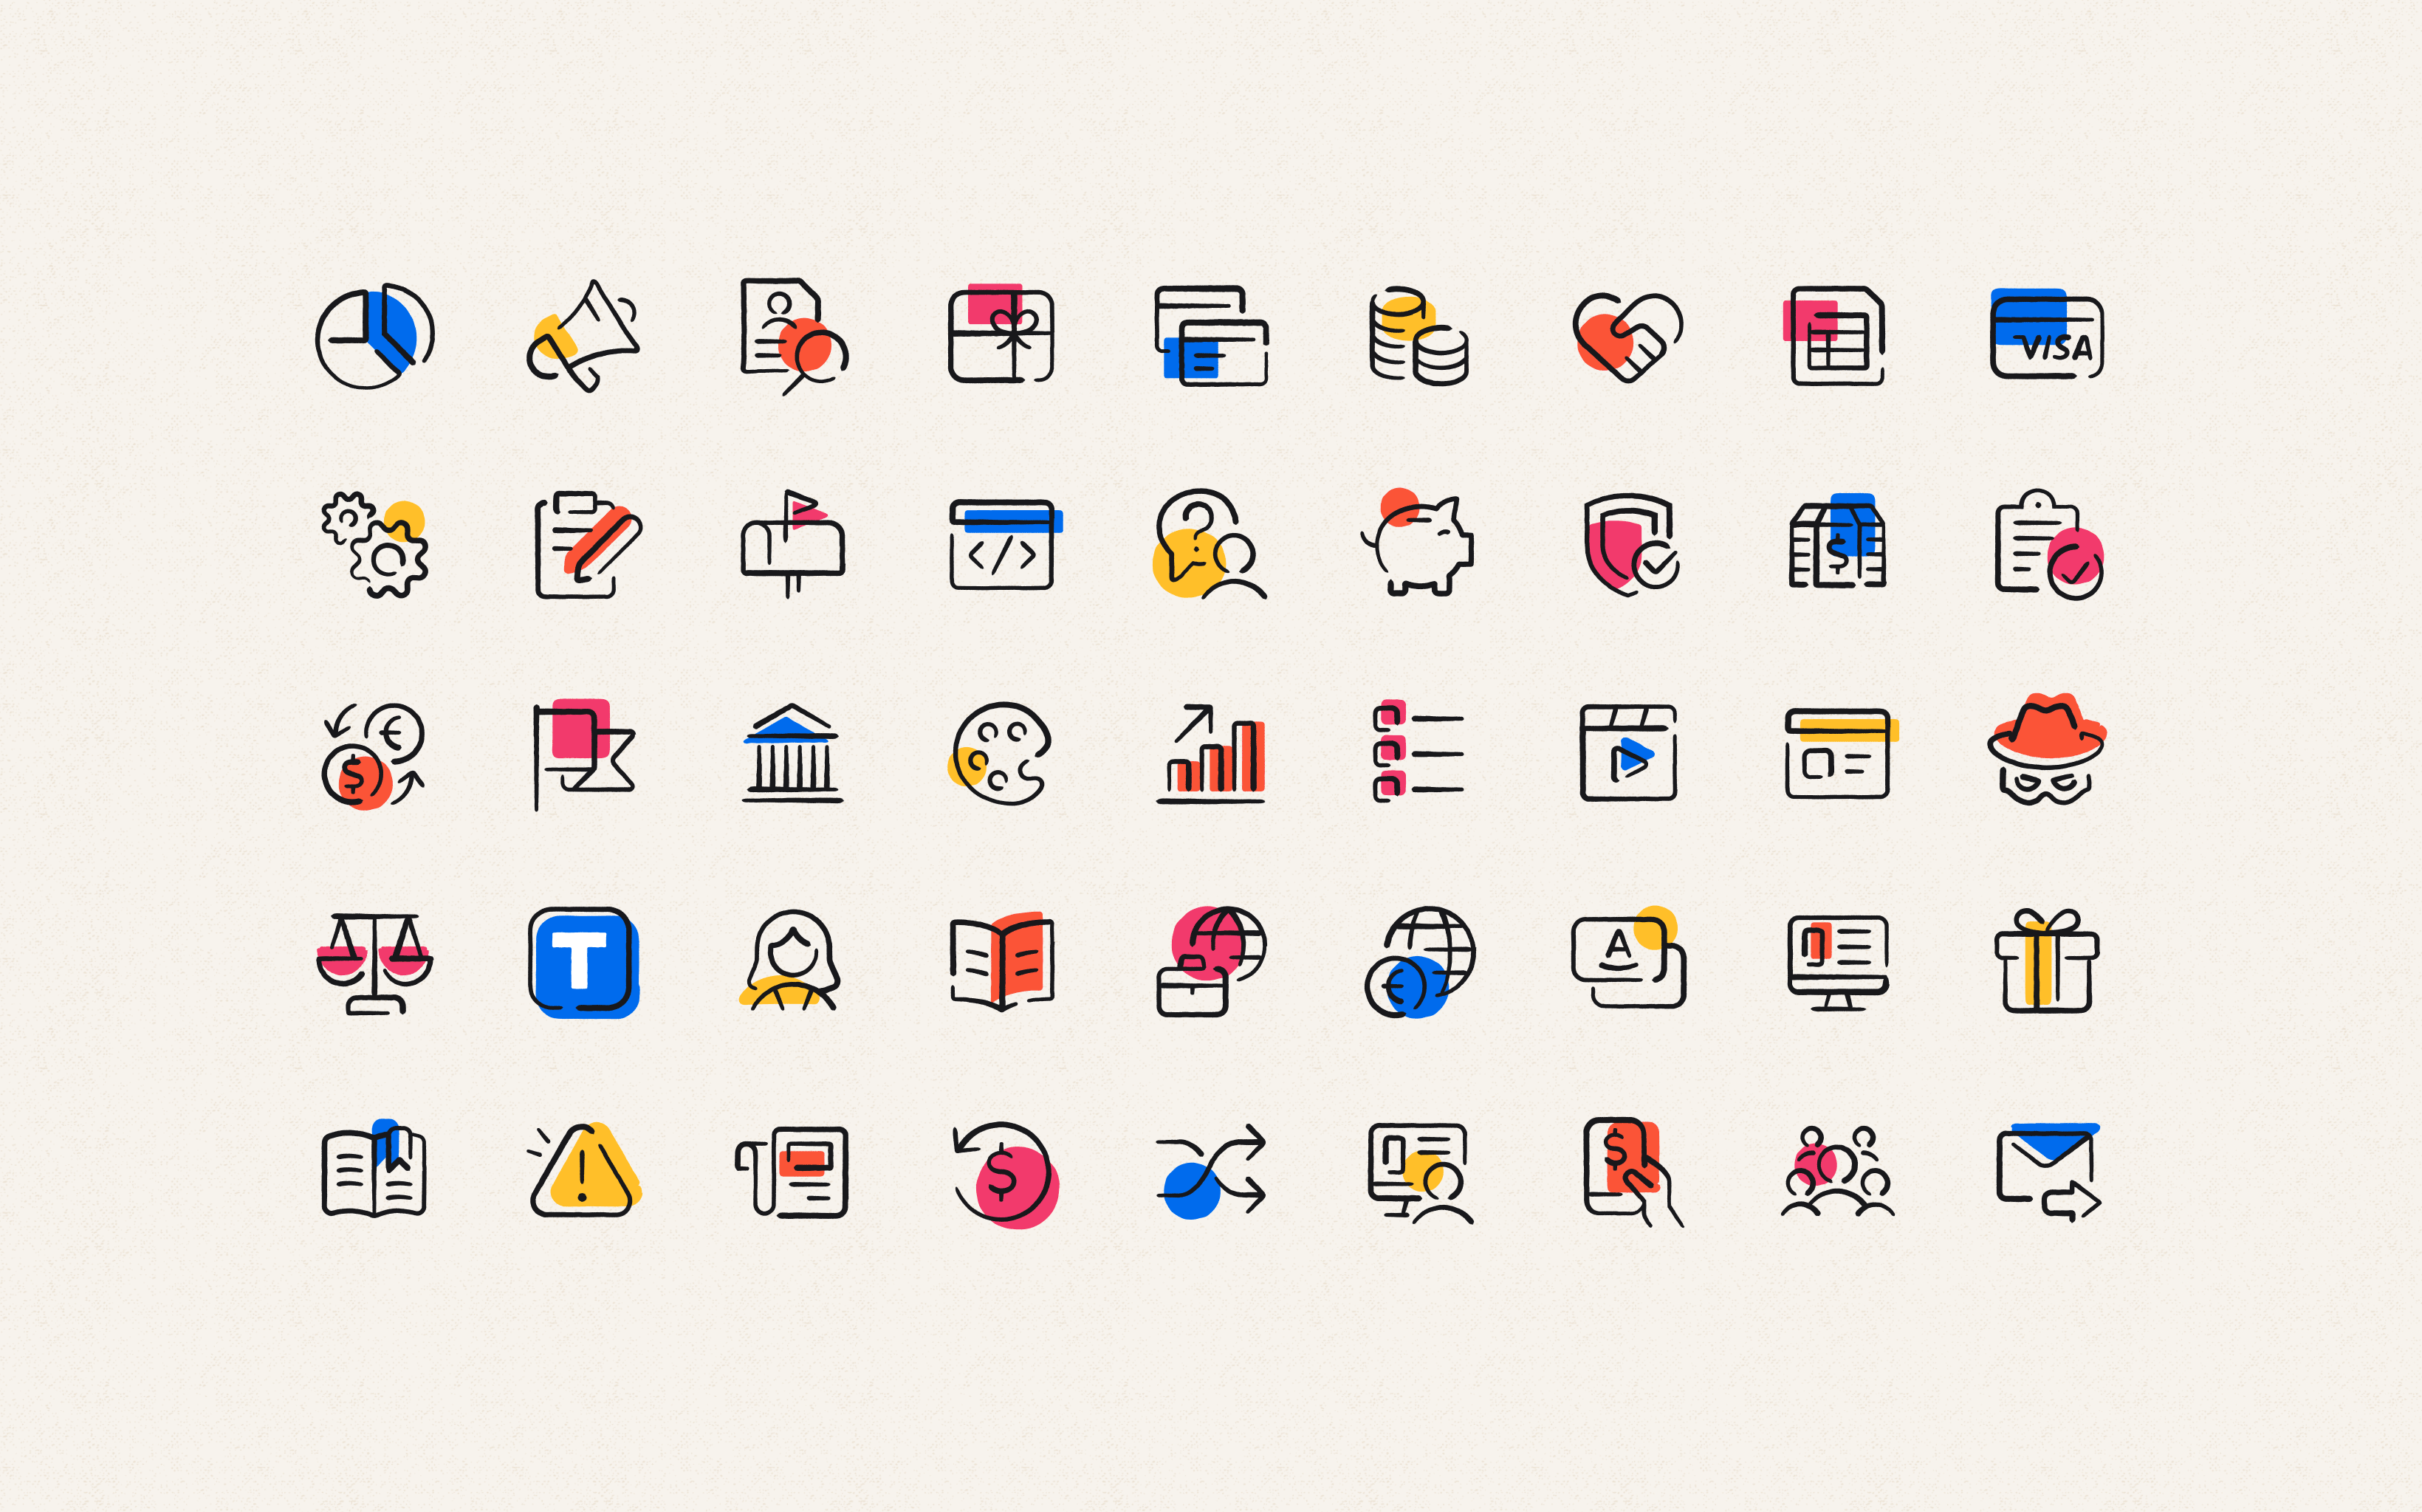 Tremendous Rewards - Icon library fintech iconography icons library money rewards rough textured